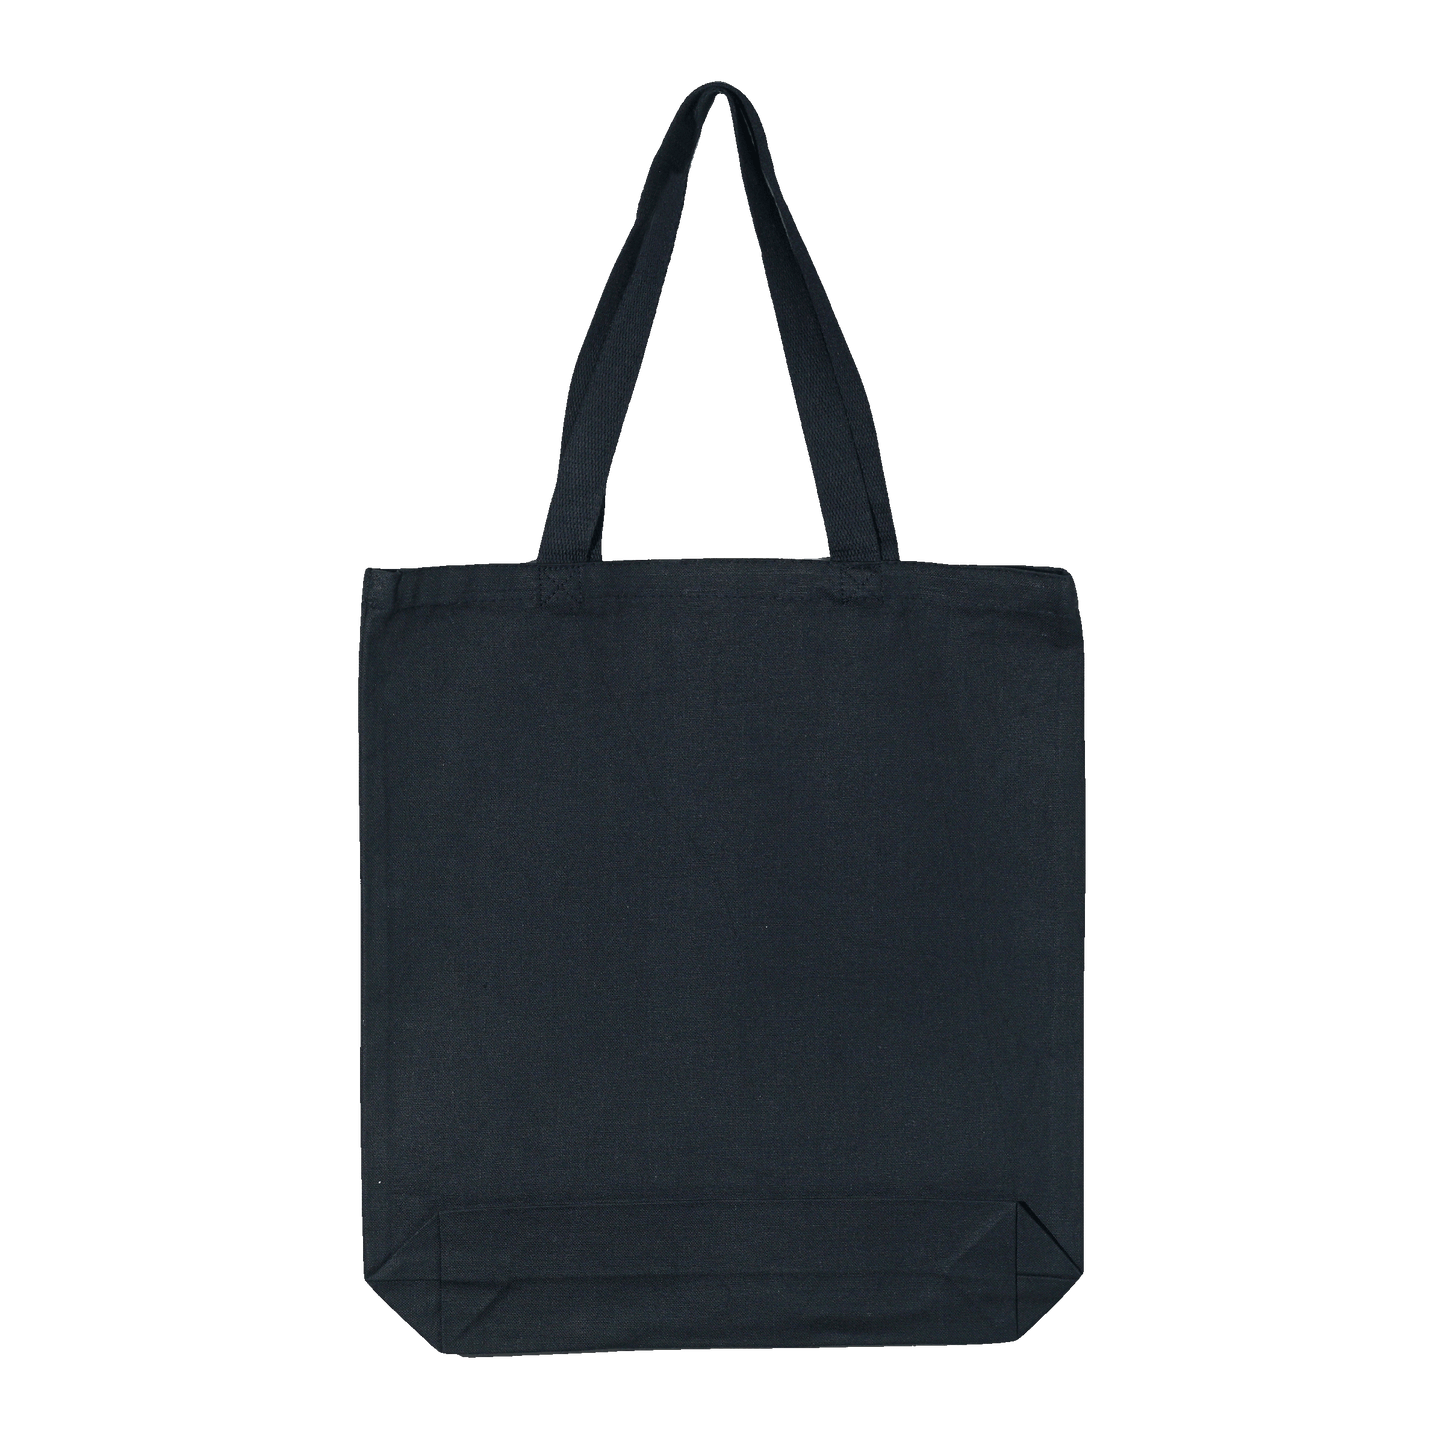 Canvas Eco Friendly Tote Bag (For Chocolate Fans)